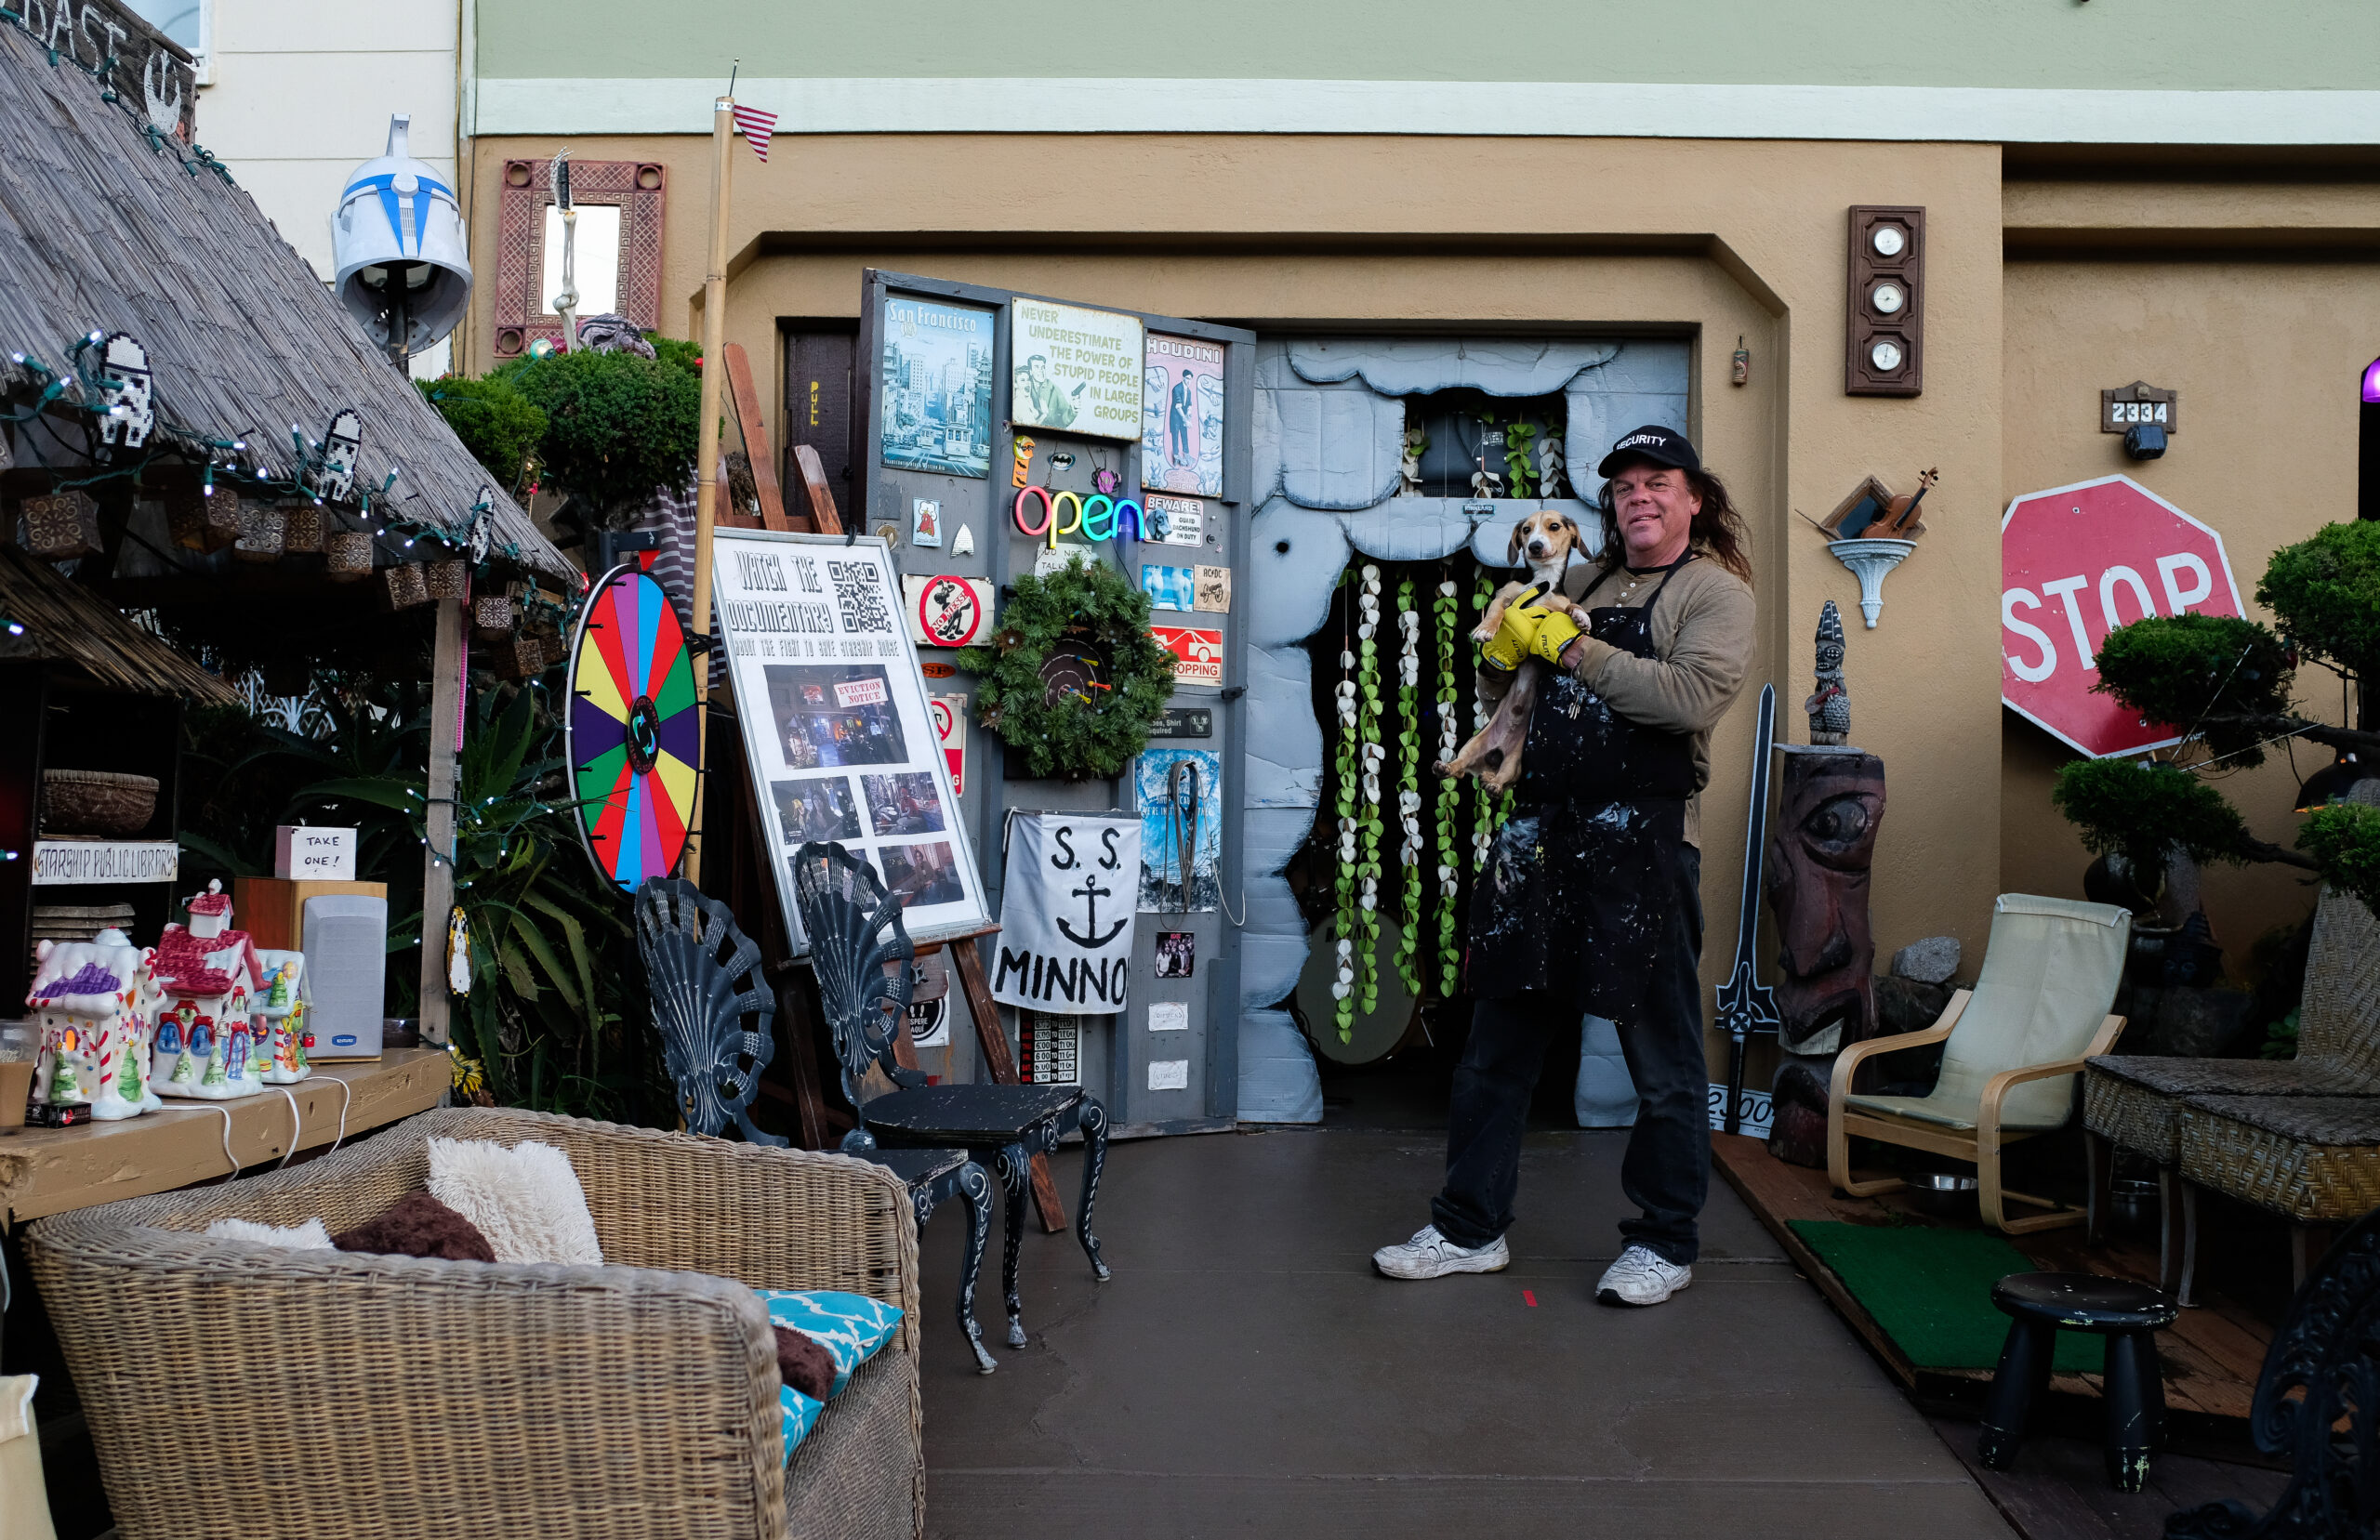 Opening doors: Repurposed SF garages give creatives space to pursue passions and chase dreams